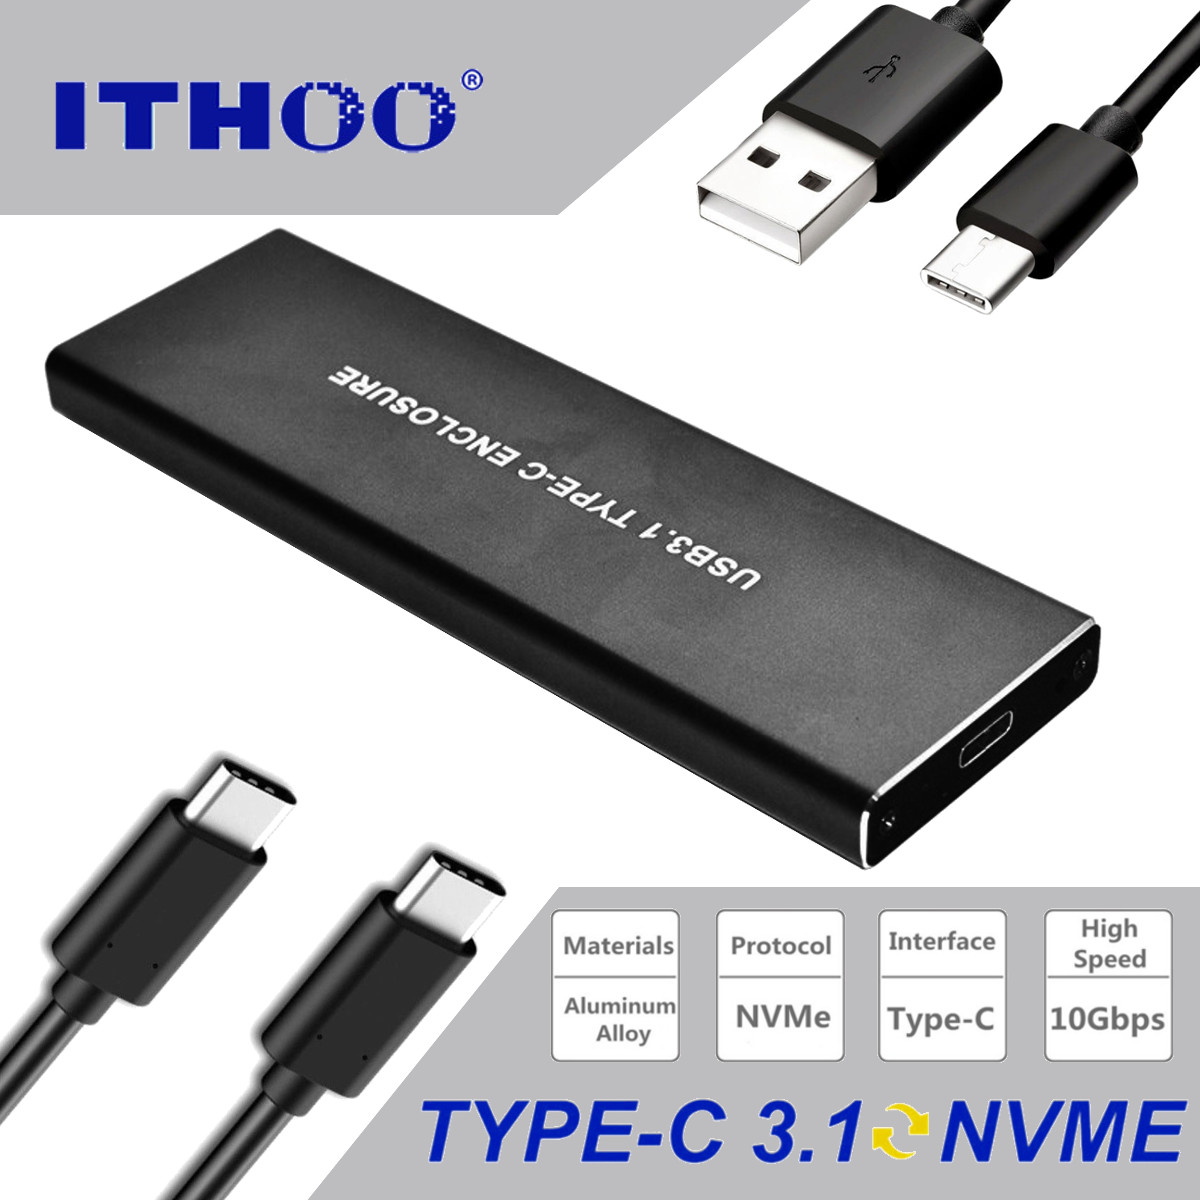 10Gbps-USB31-Type-C-to-M2-NVME-NGFF-PCIE-SSD-Hard-Drive-Enclosure-1372508-1